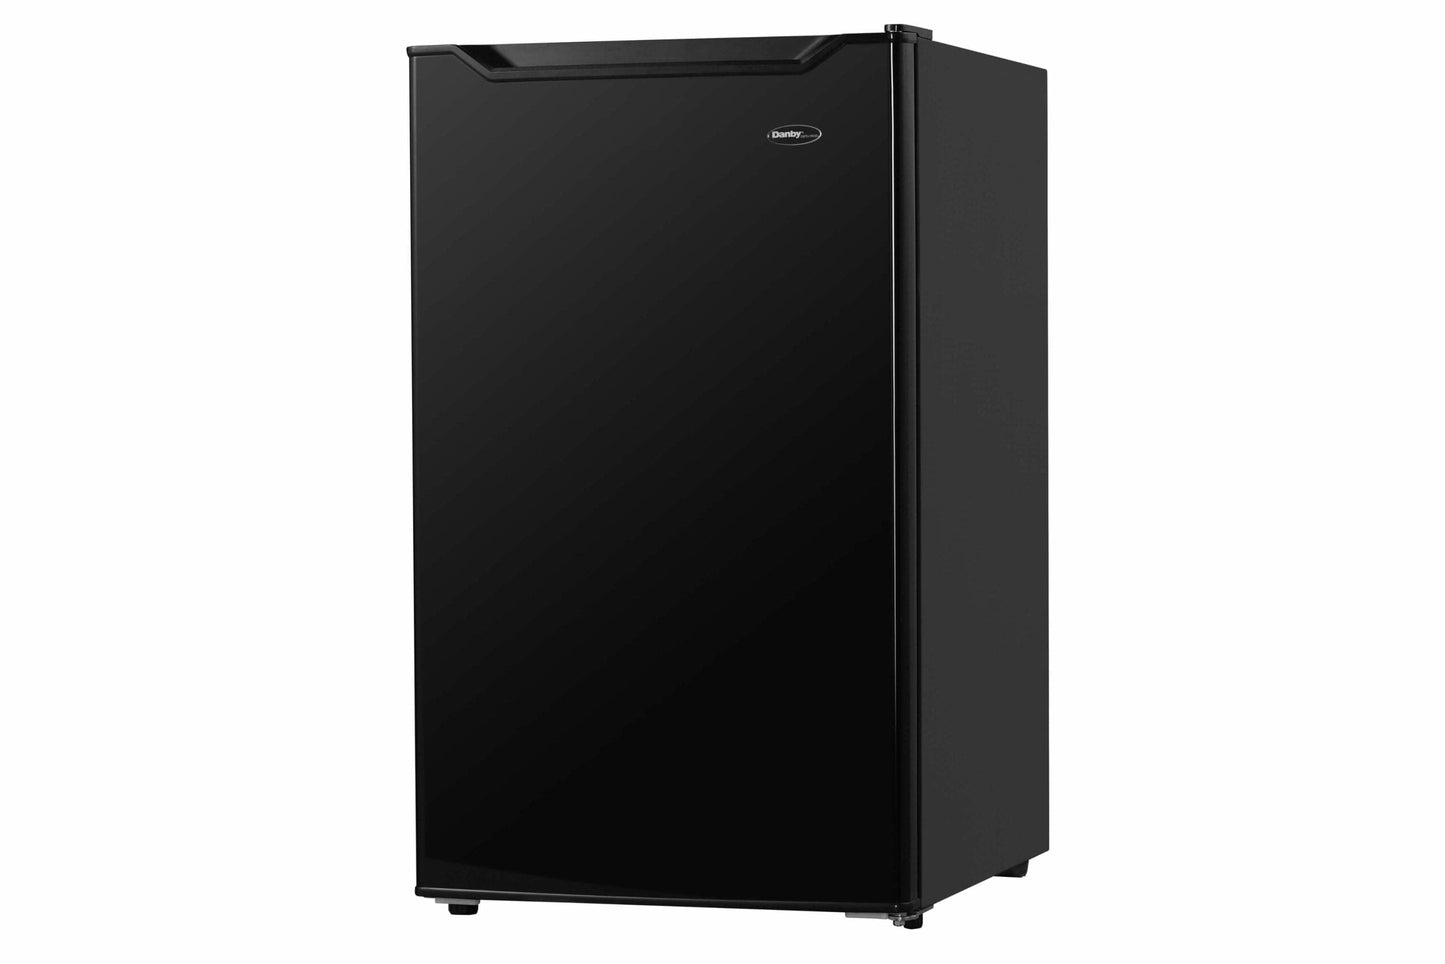 Danby 4.4 cu ft Compact Refrigerator Black Stainless Steel